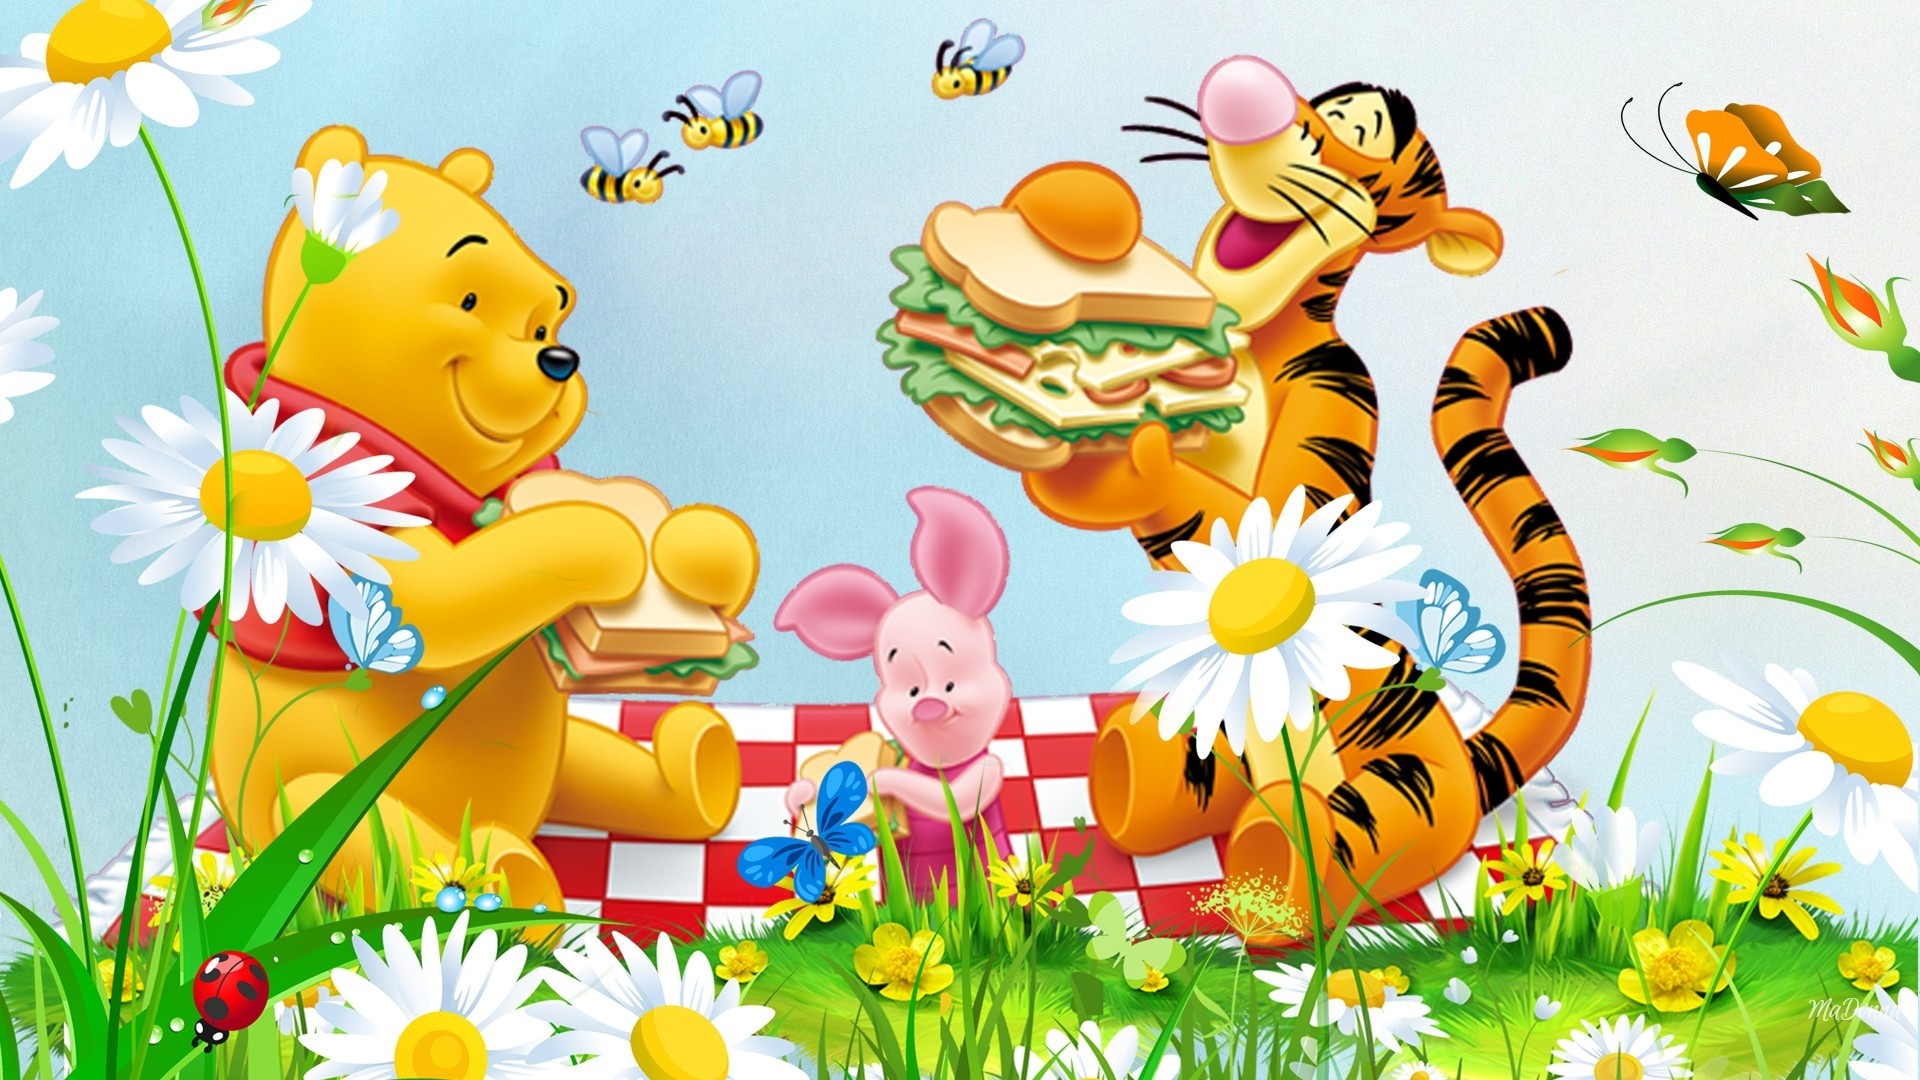 Picnic Flowers Grass Bee Winnie The Pooh Tigger And Piglet Cartoon Hd Wallpapers 1920x1080 Wallpapers13 Com